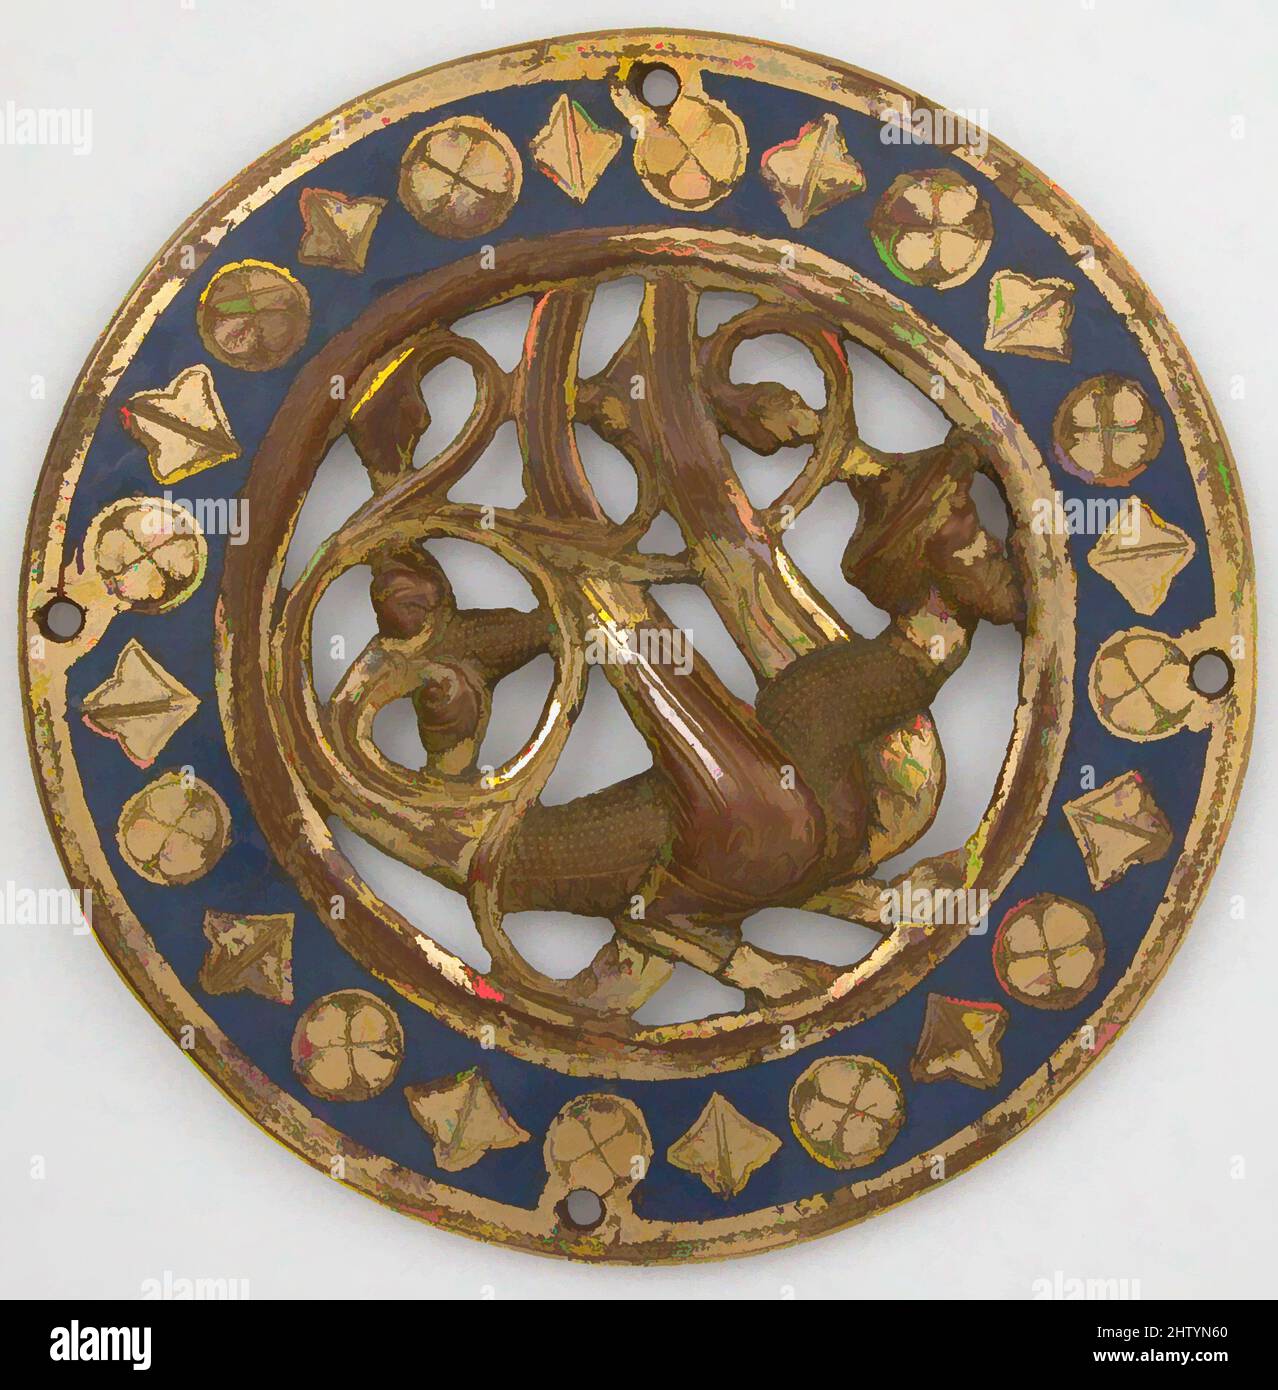 Art inspired by Medallion, before 1227, Made in Limoges, France, French, Copper, champlevé enamel, Overall: 3 7/16 x 3/16 in. (8.7 x 0.5 cm), Enamels-Champlevé, These medallions probably come from a large traveling chest that belonged to Cardinal Guala Bicchieri. A collector and, Classic works modernized by Artotop with a splash of modernity. Shapes, color and value, eye-catching visual impact on art. Emotions through freedom of artworks in a contemporary way. A timeless message pursuing a wildly creative new direction. Artists turning to the digital medium and creating the Artotop NFT Stock Photo